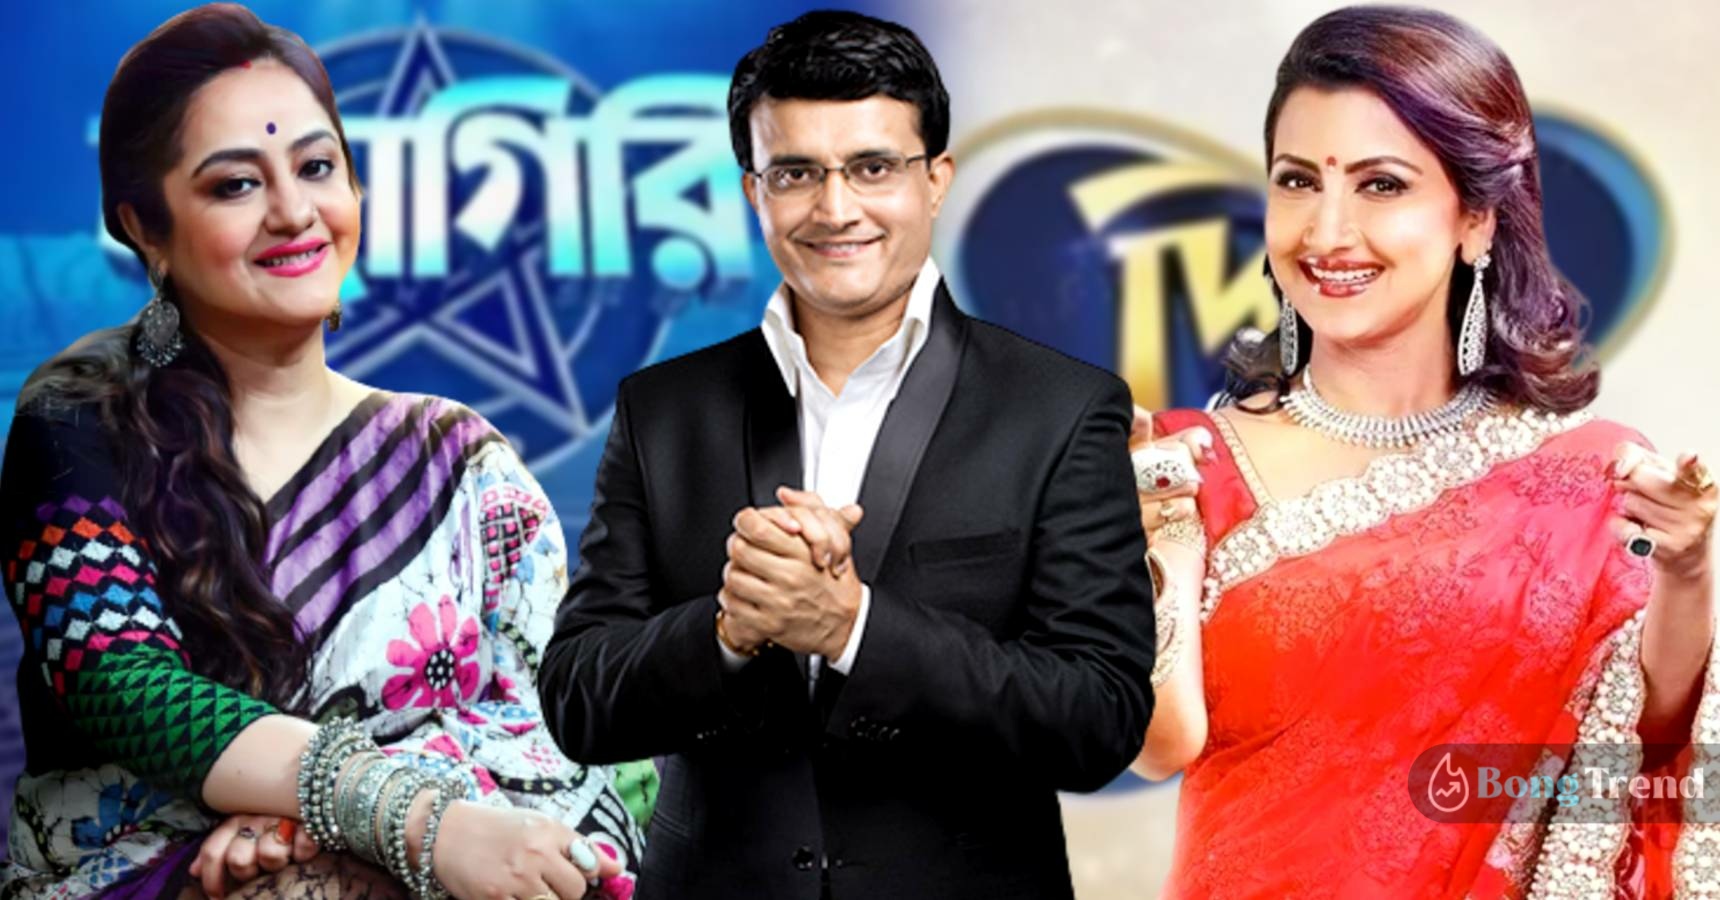 Take a look at the all-time favourite non-fiction show o Bengali television